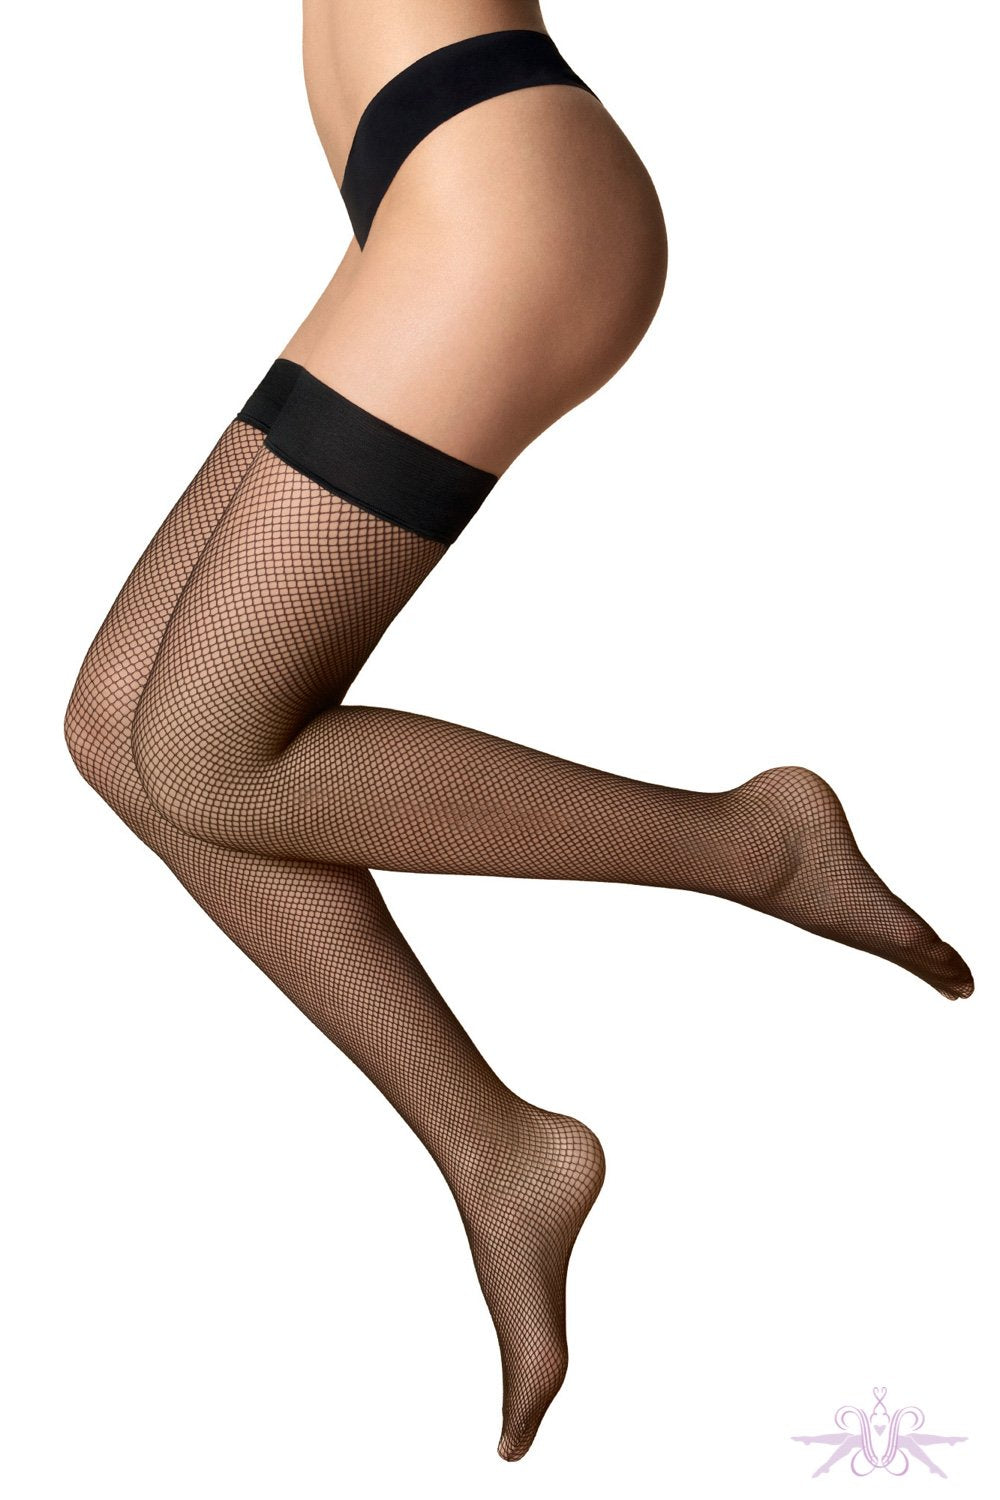 Le Bourget Resille Hold Ups - The Hosiery Box